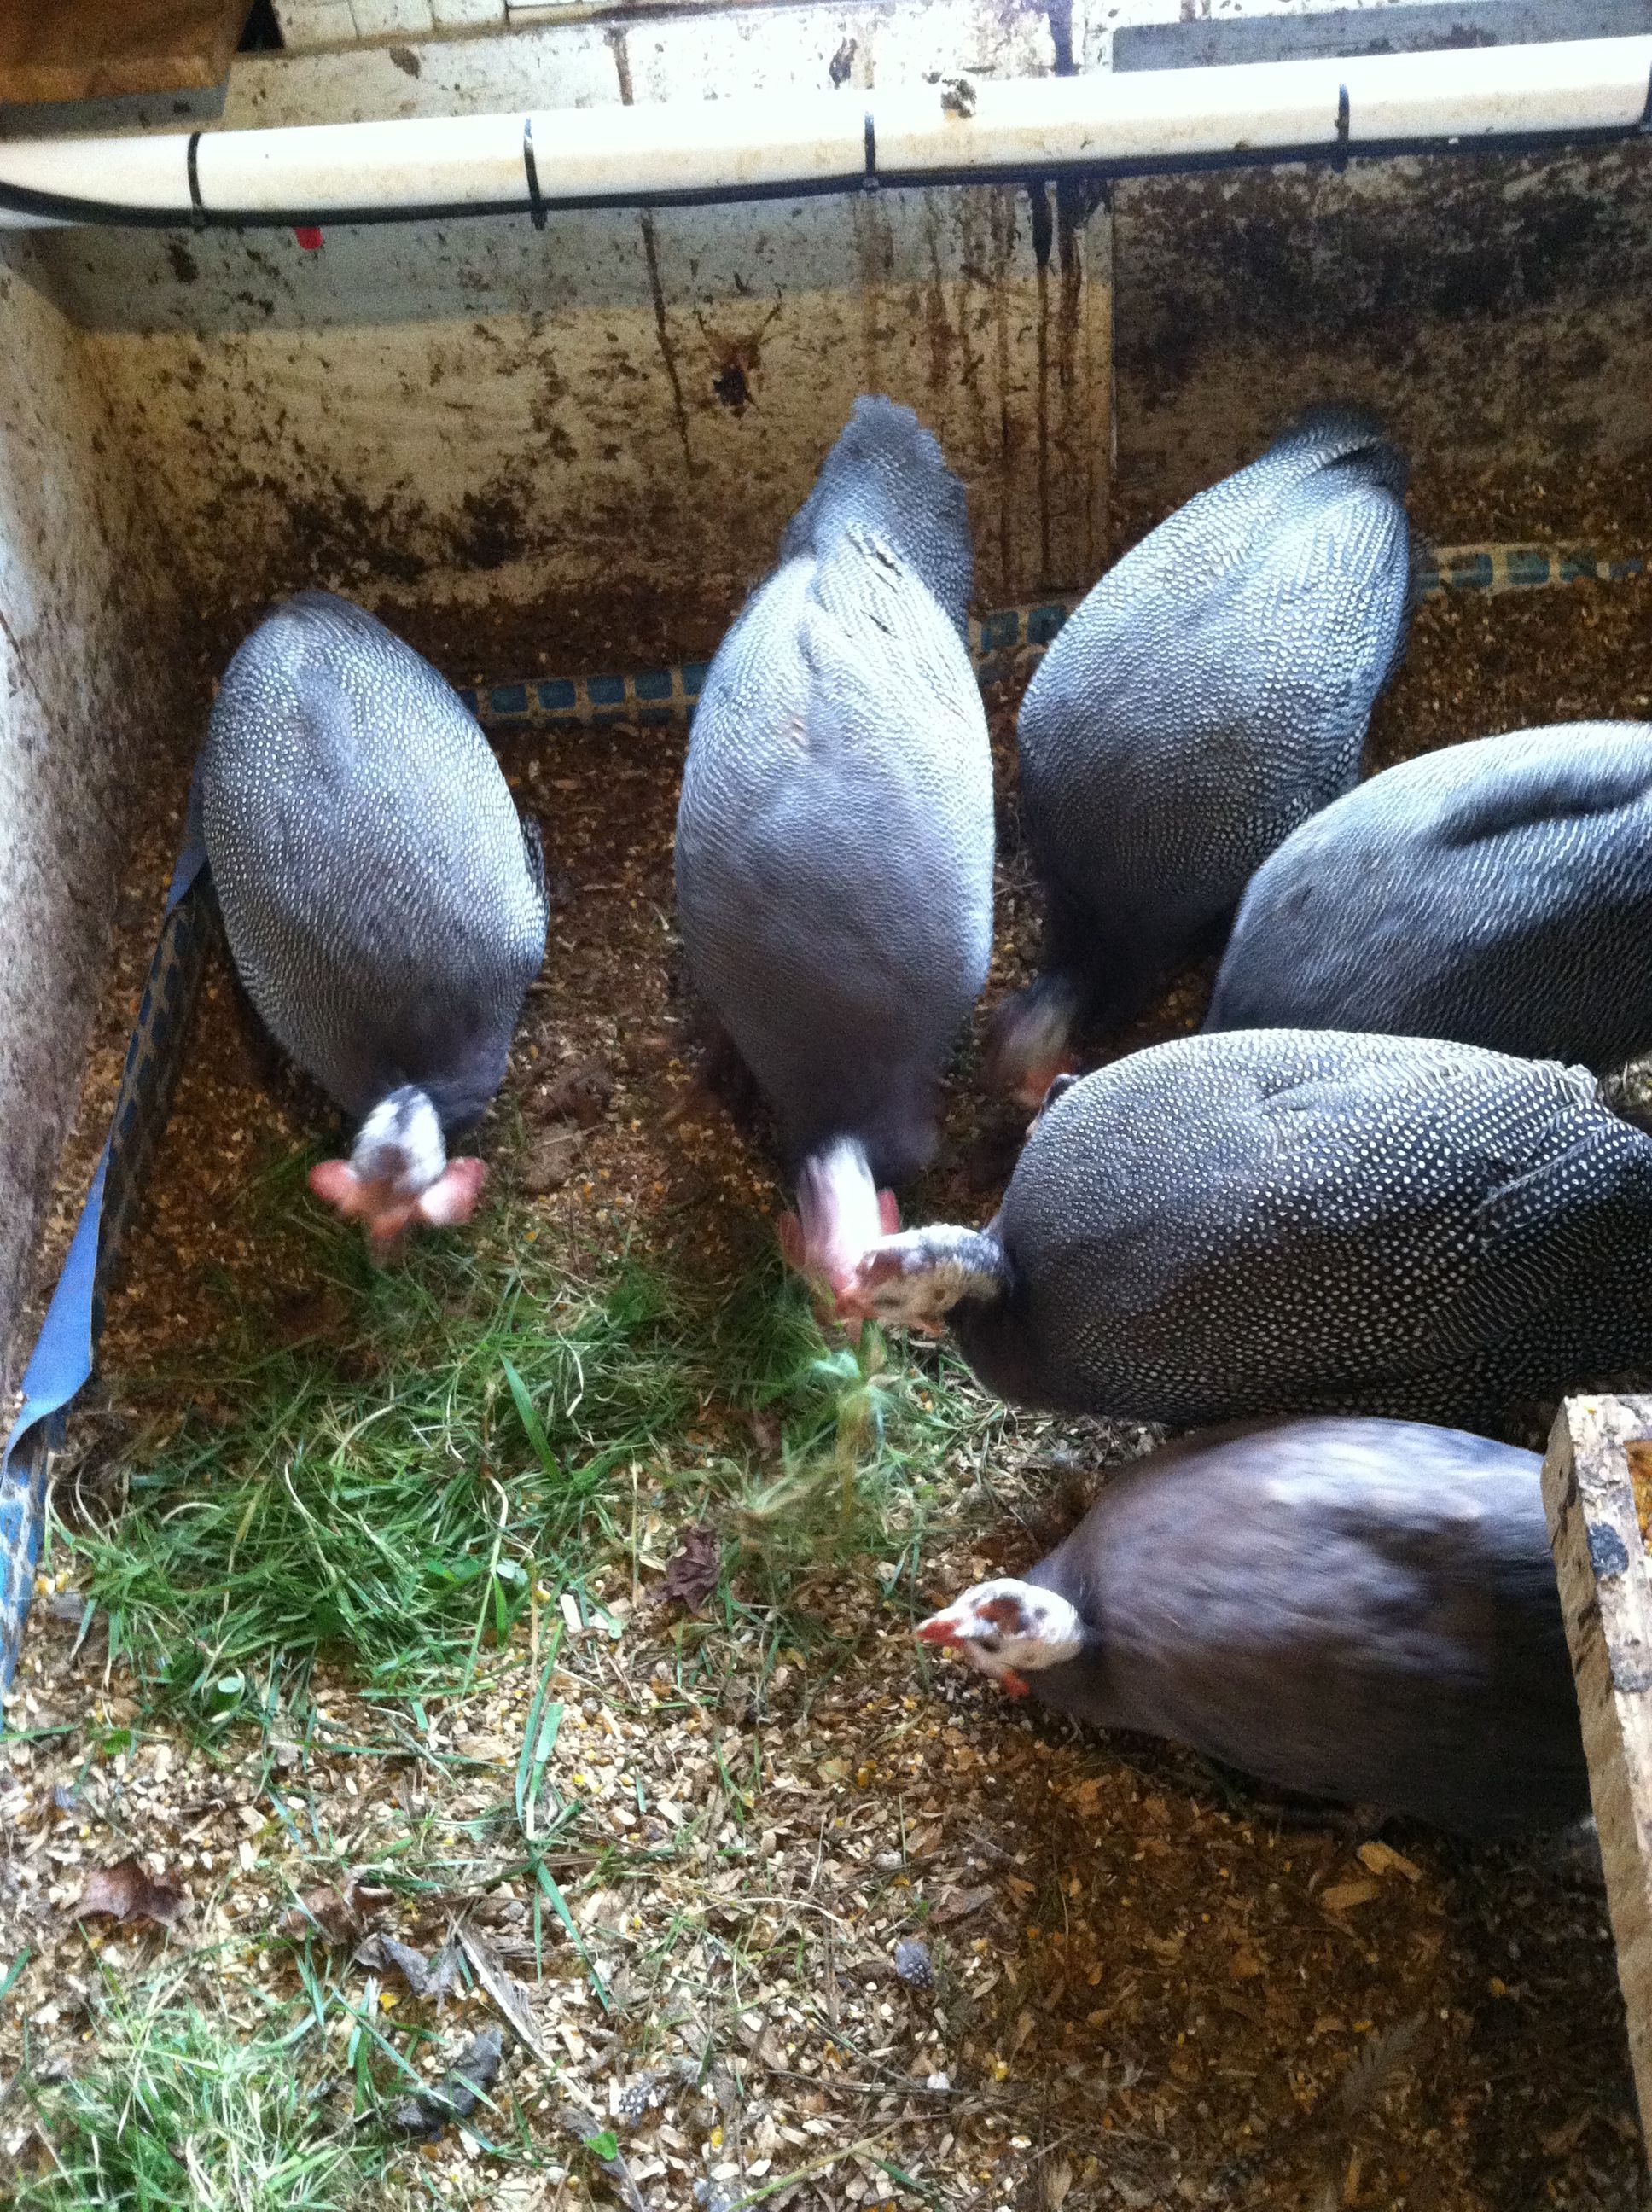 Jumbo/French Guineas with a Violet Guinea in front for comparison.